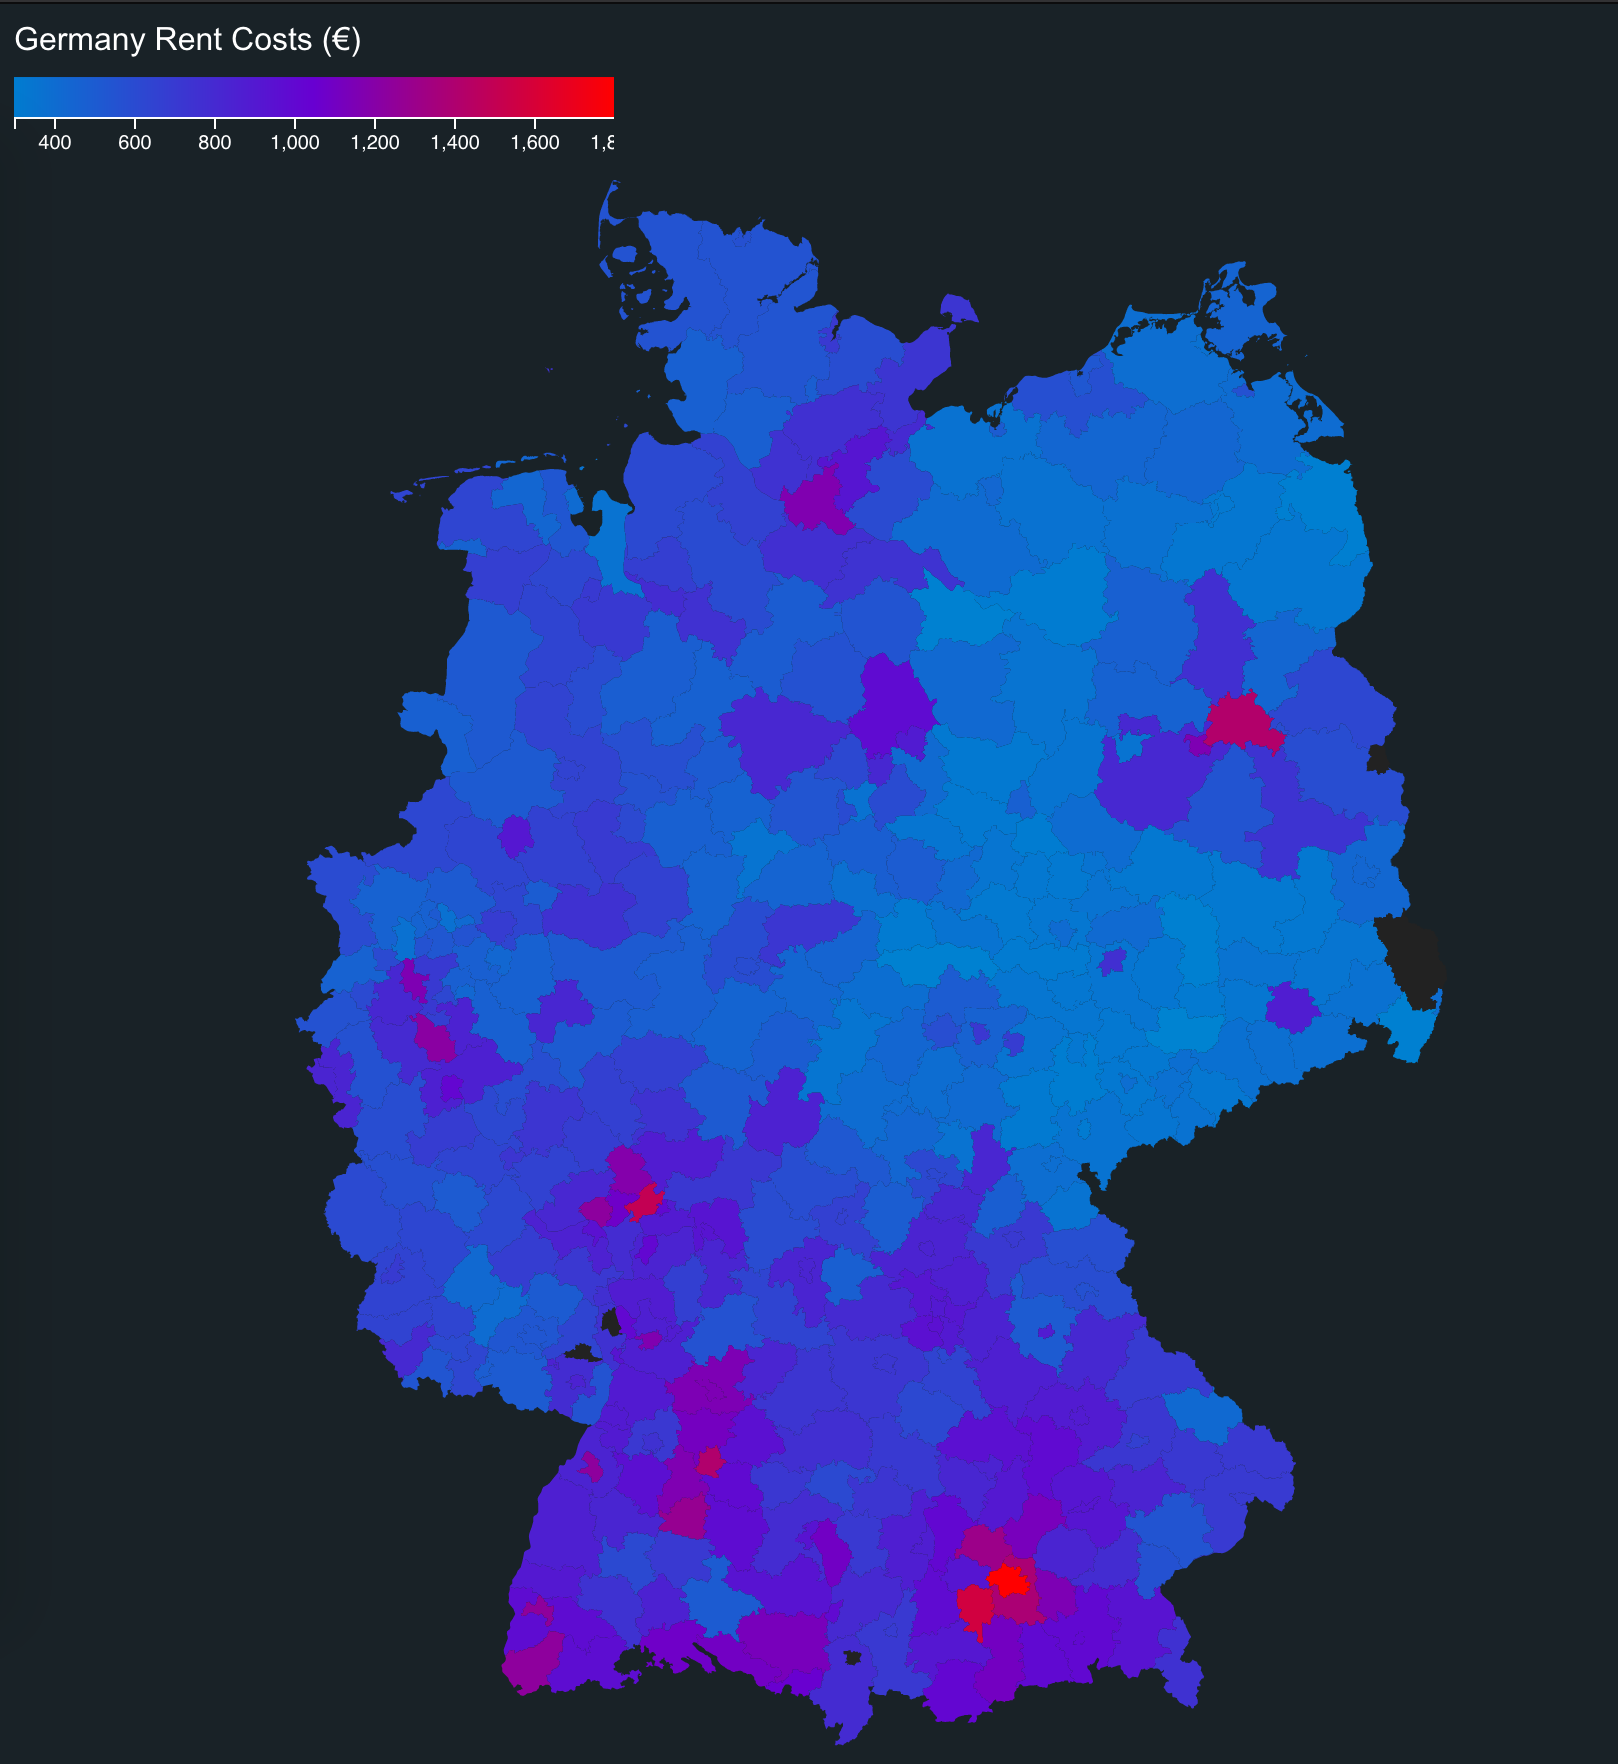 Germany rent map